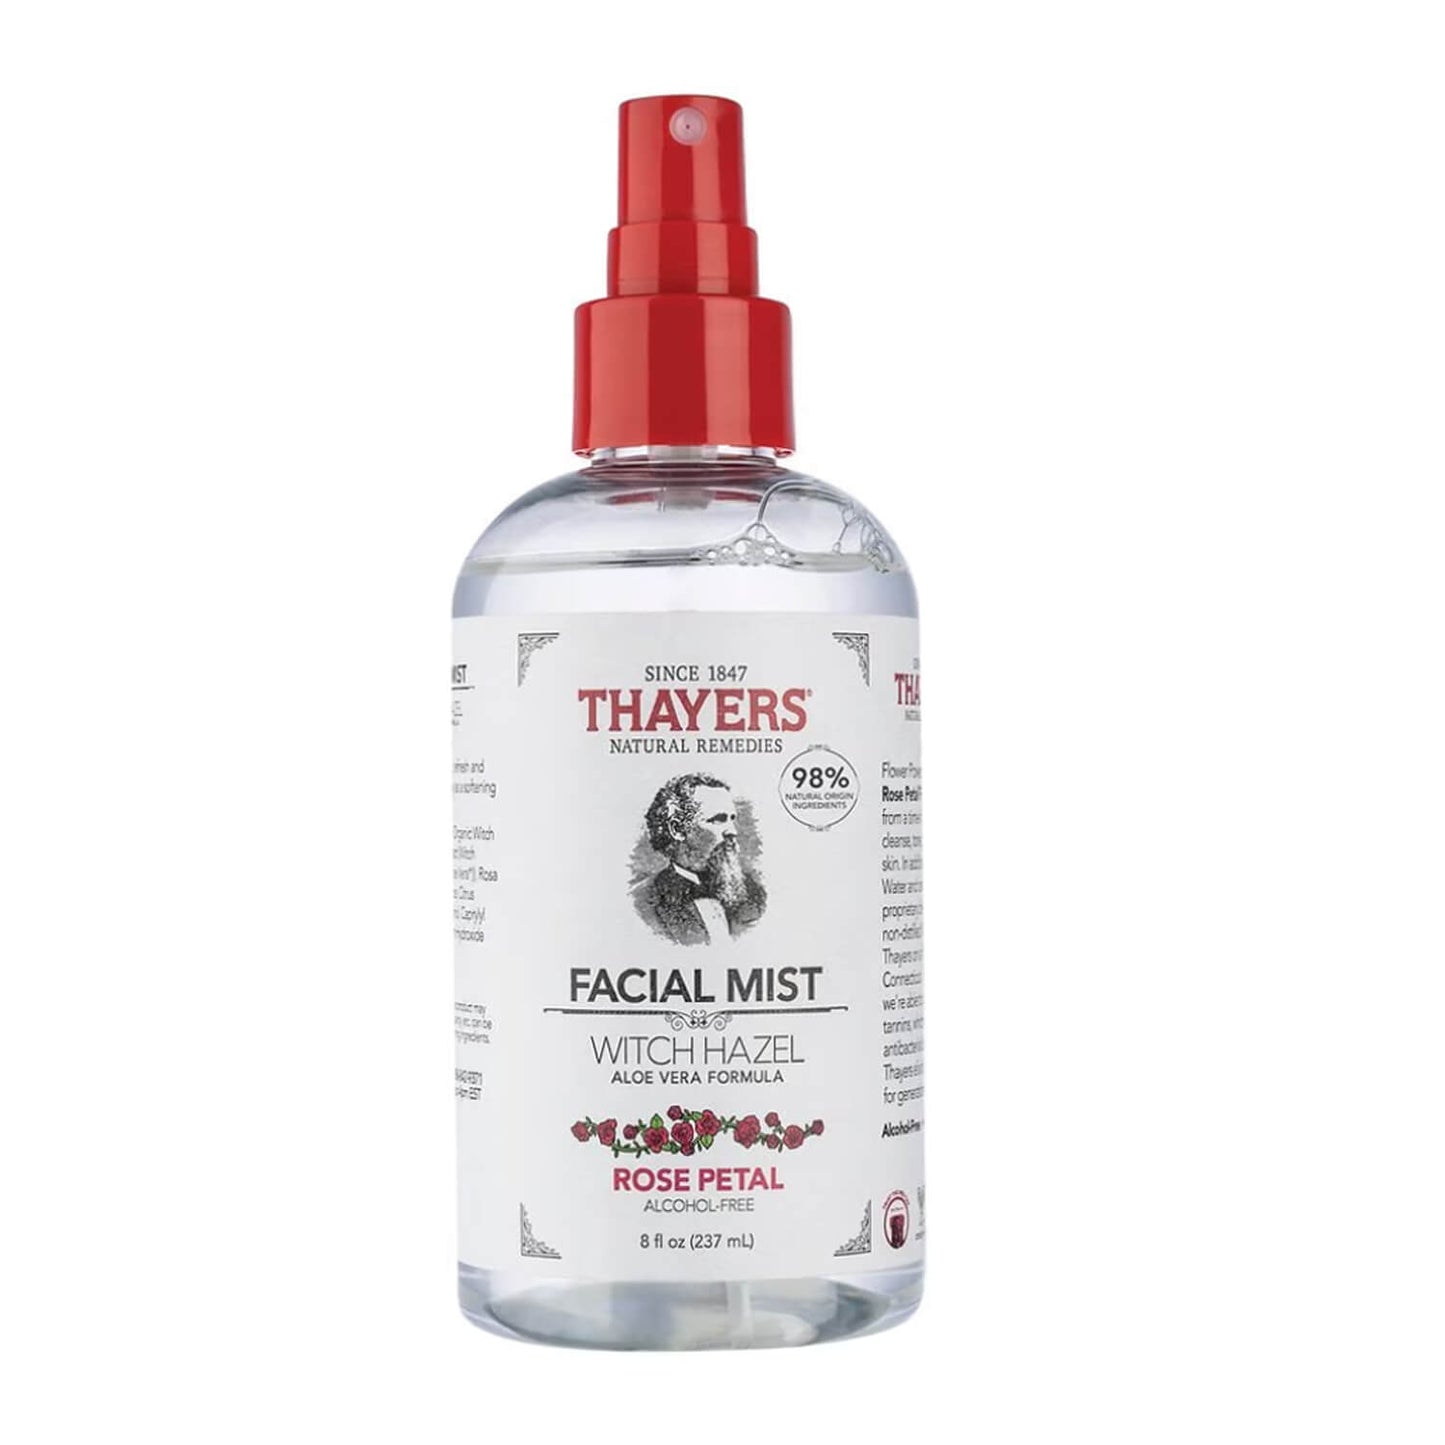 Shop Thayers Rose Petal Facial Mist available at Heygirl.pk for delivery in Pakistan